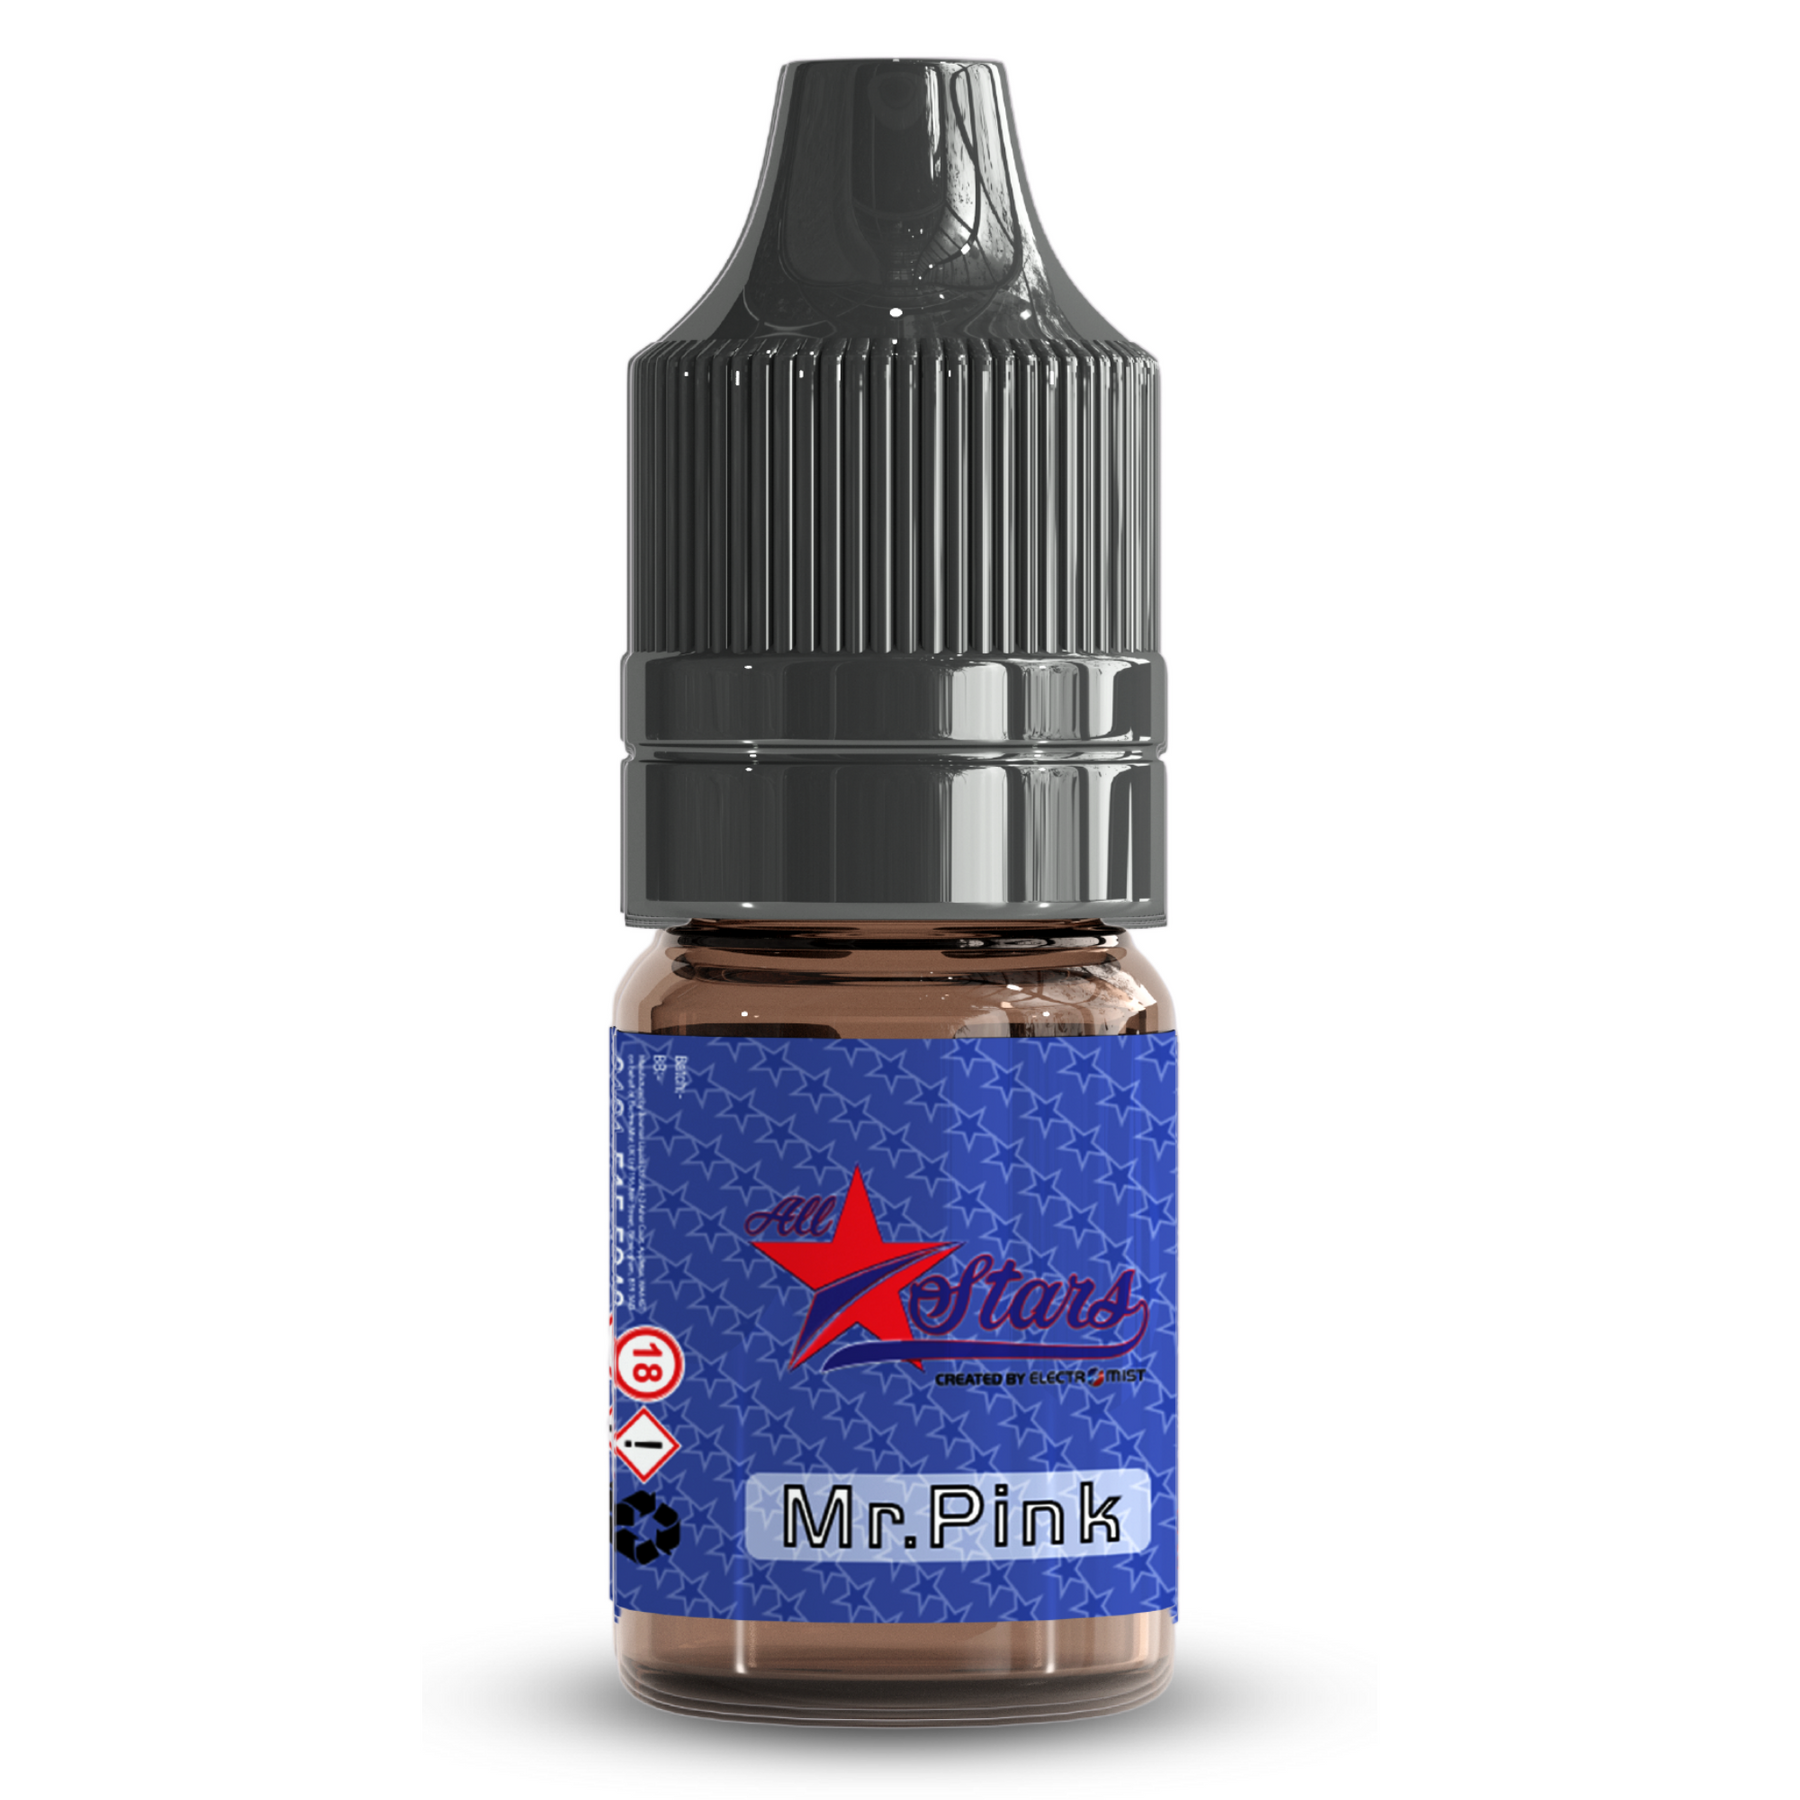 All Stars E-Liquid from the vape brand you can trust, Electromist, . Get your taste buds ready for a flavour sensation, Mr Pink. Nicotine Content: 6mg/12mg/18mg Products may contain nicotine. For over 18s Only ejuice, vape pen, eliquid, e cigarette, 10ml, vaping, cloud, PG, VG, 60/40, vape liquid, Flavour, TPD